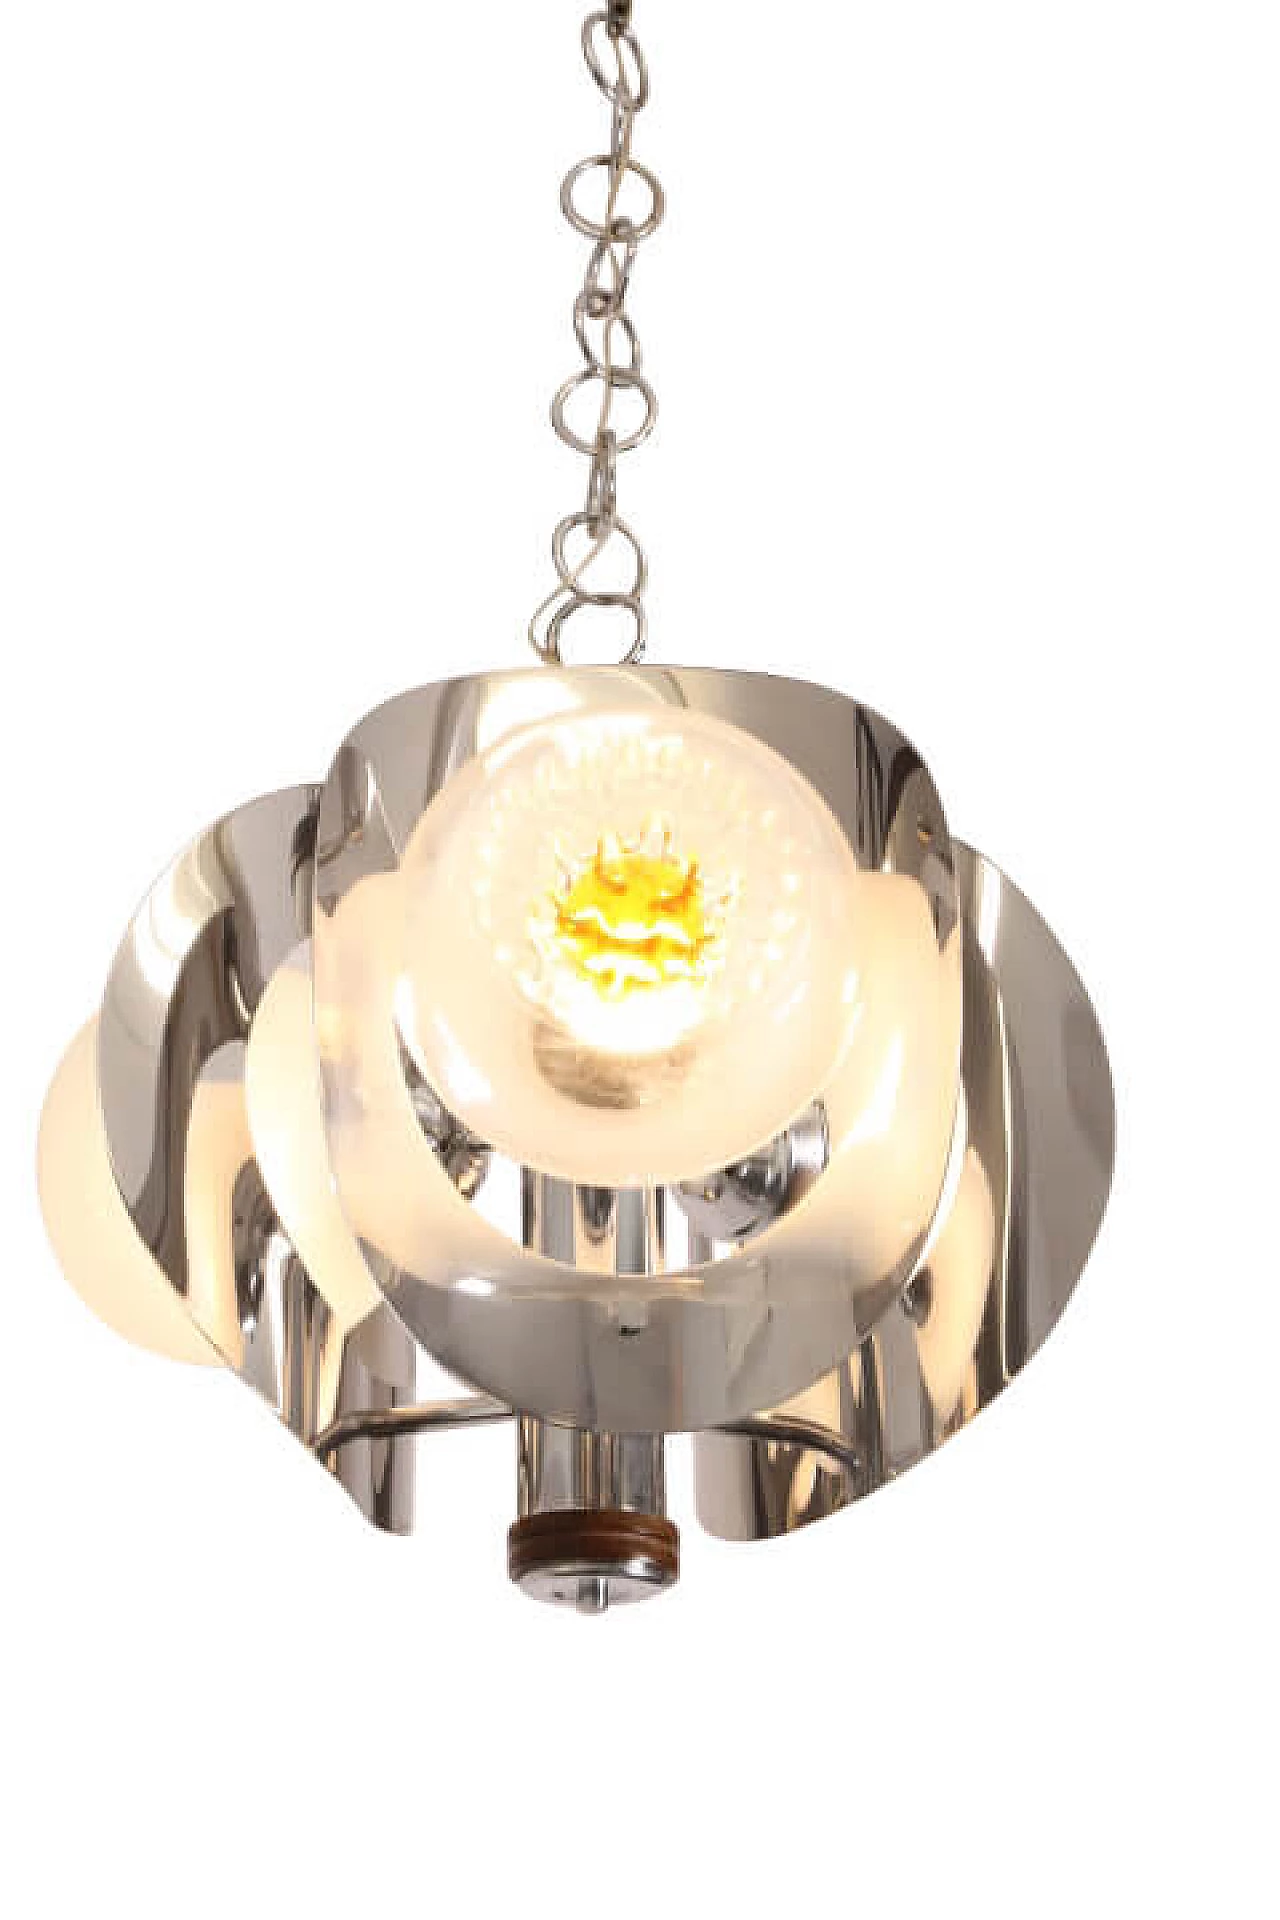 Chandelier Mazzega 3 lights with Murano glass, 70s 1239214